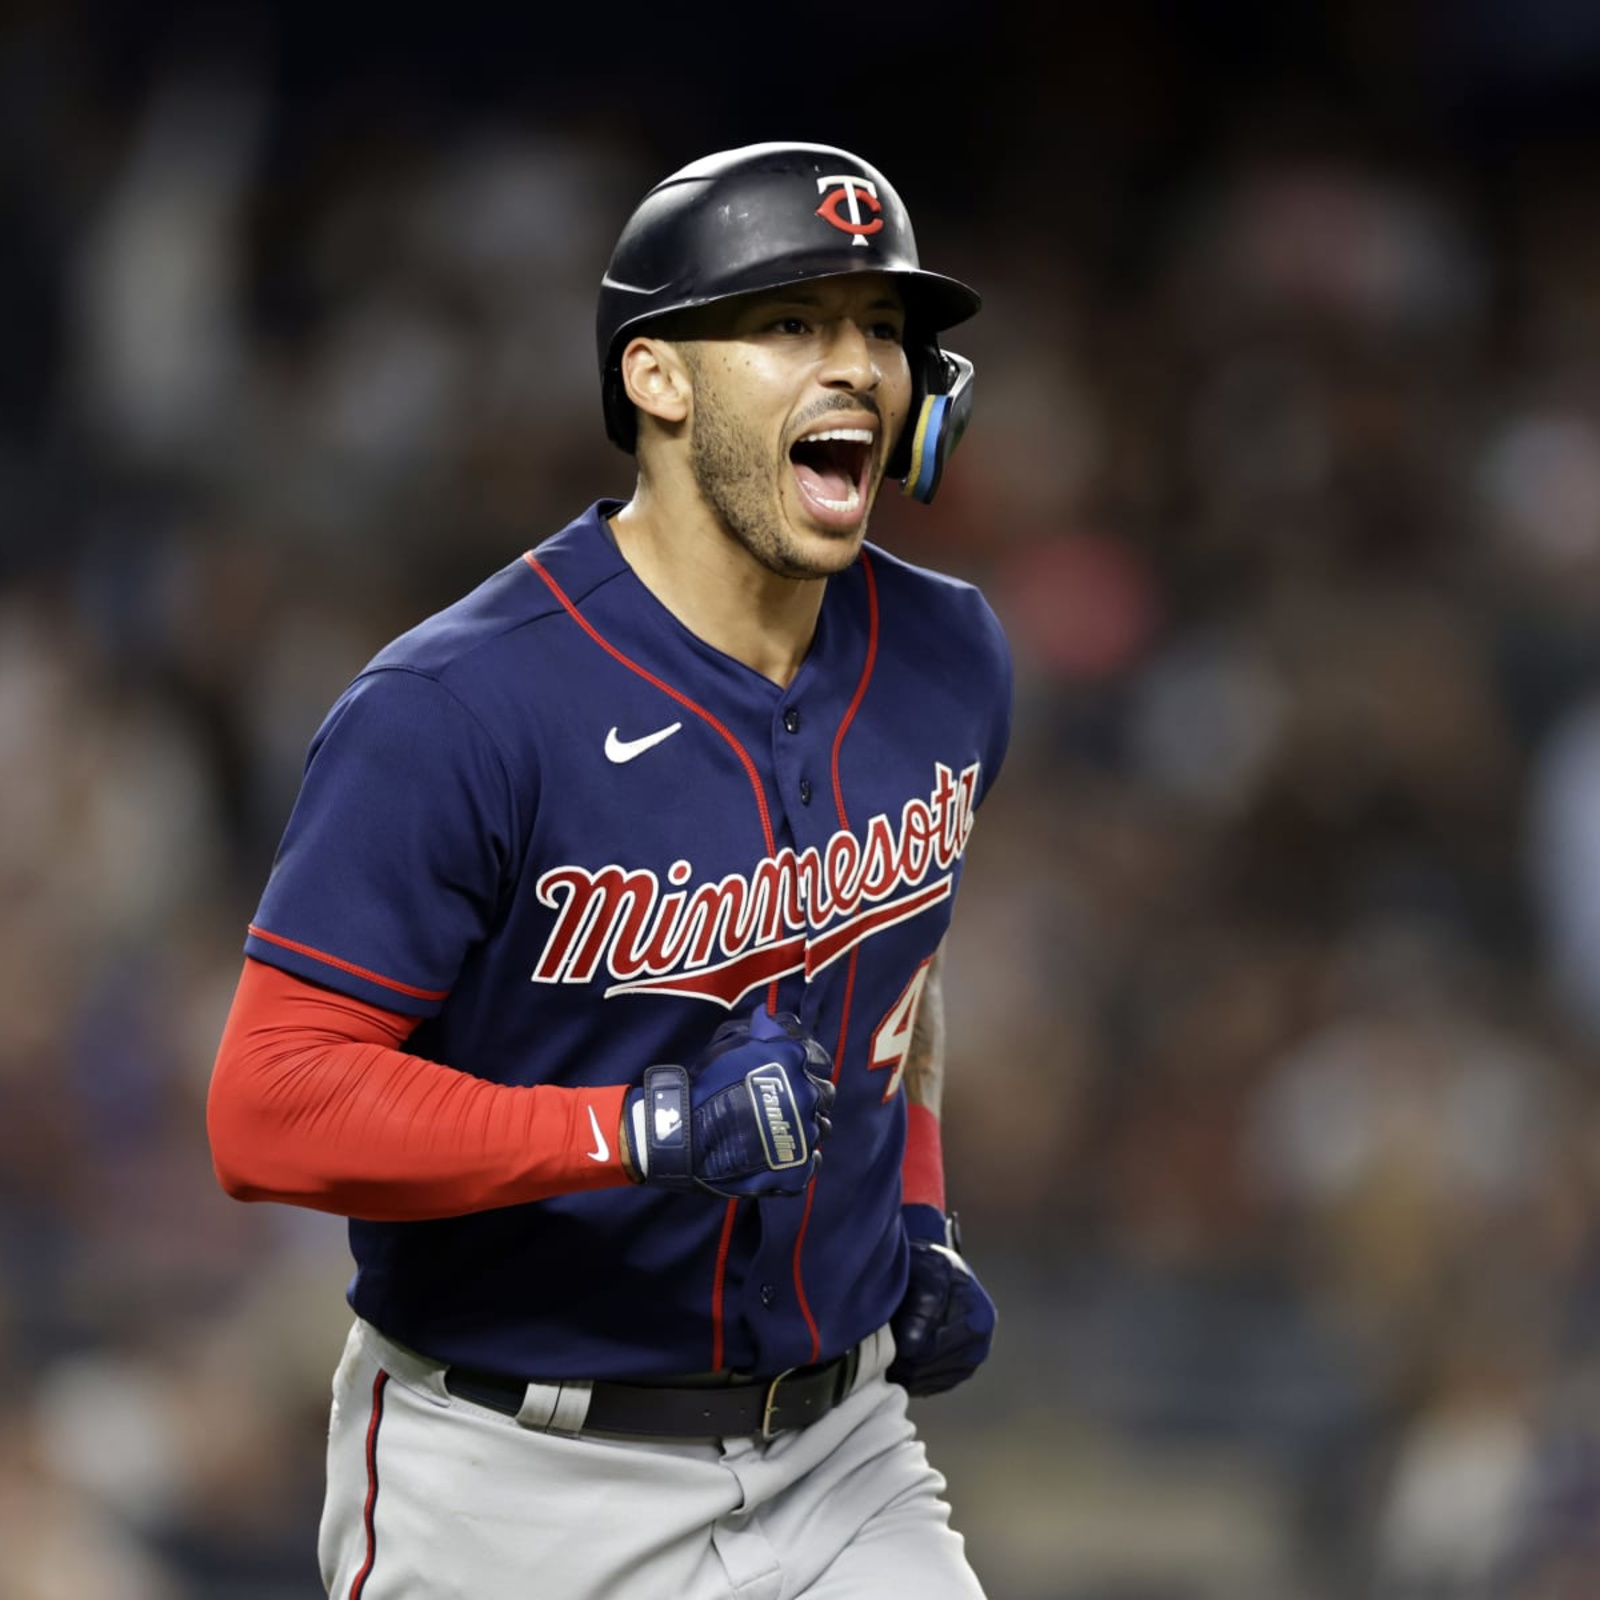 Shortstop Andrelton Simmons agrees to 1-year deal with Minnesota Twins